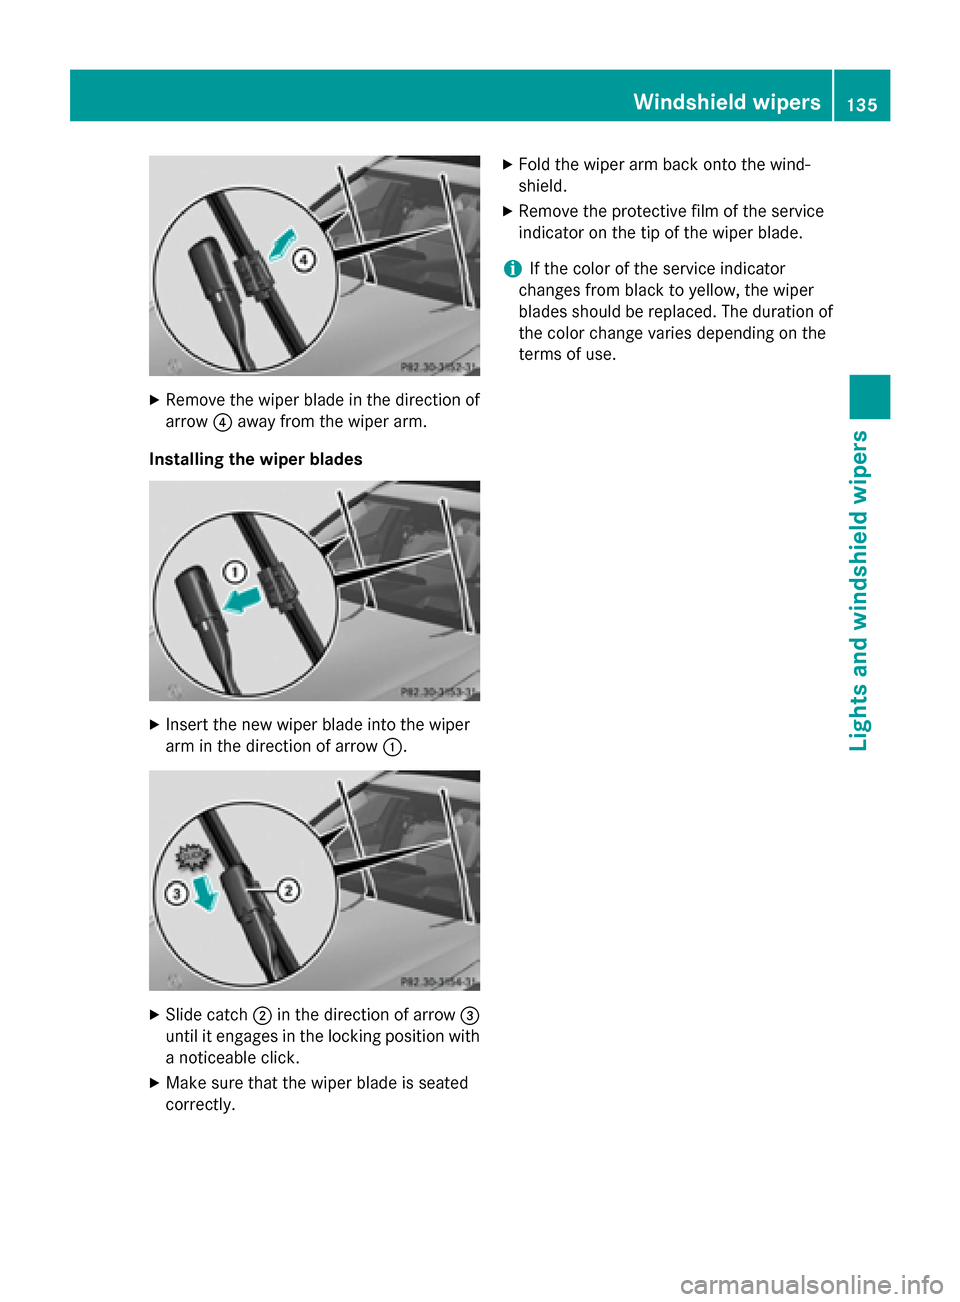 MERCEDES-BENZ C-Class SEDAN 2015 W205 Owners Manual X
Remove the wiper blade in the direction of
arrow 0085away from the wiper arm.
Installing the wiper blades X
Insert the new wiper blade into the wiper
arm in the direction of arrow 0043.X
Slide catch